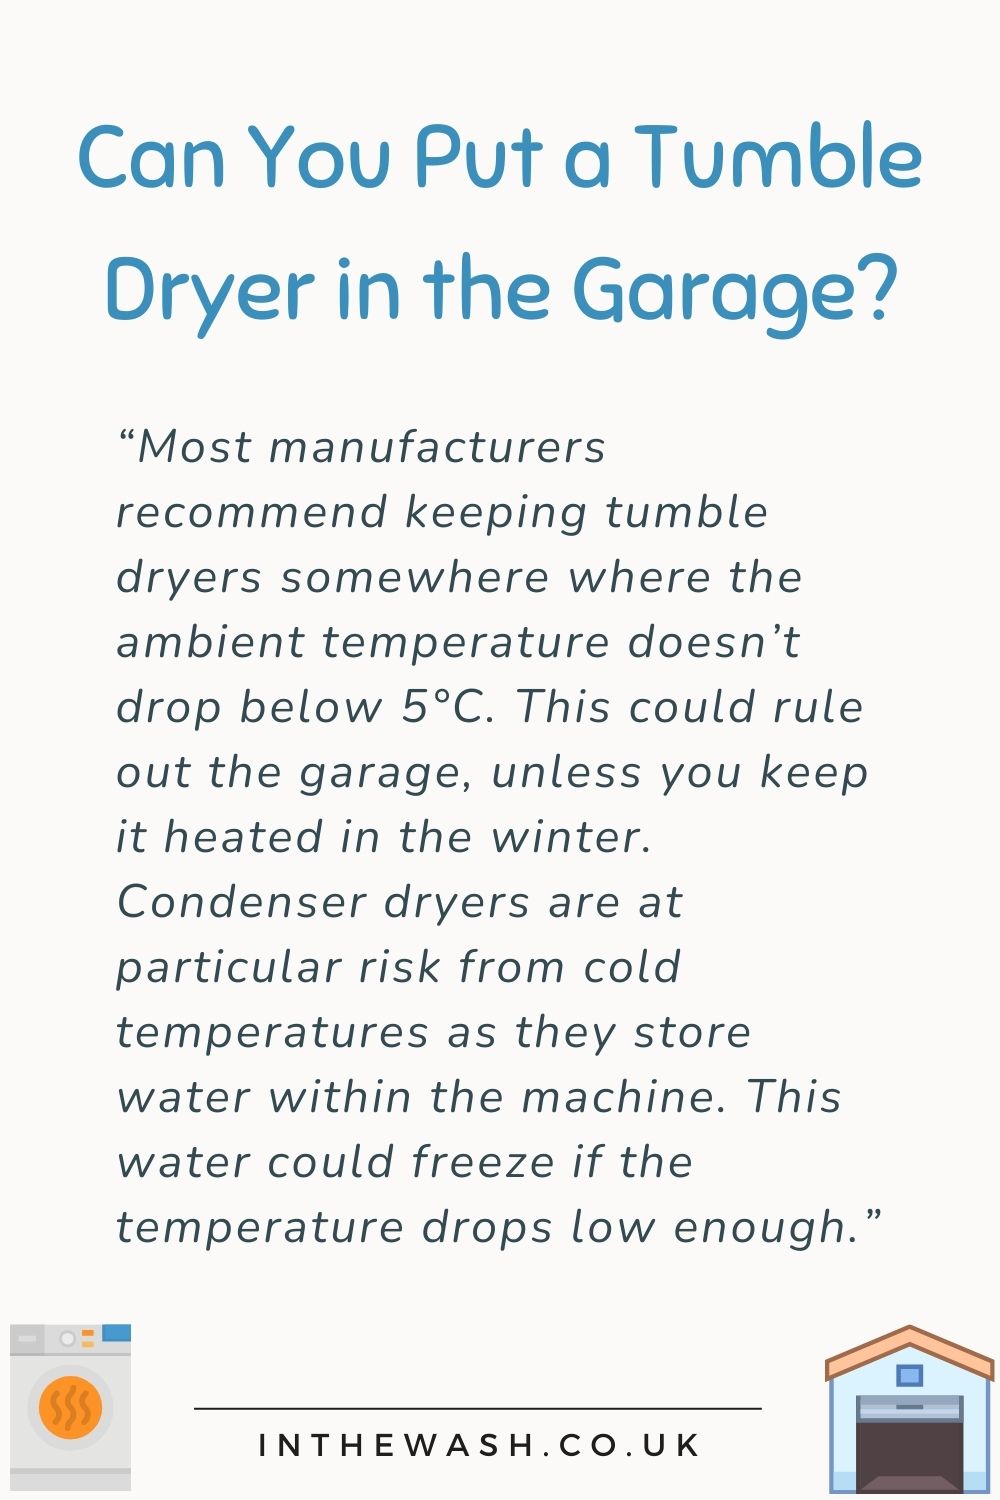 Can You Put a Tumble Dryer in the Garage?